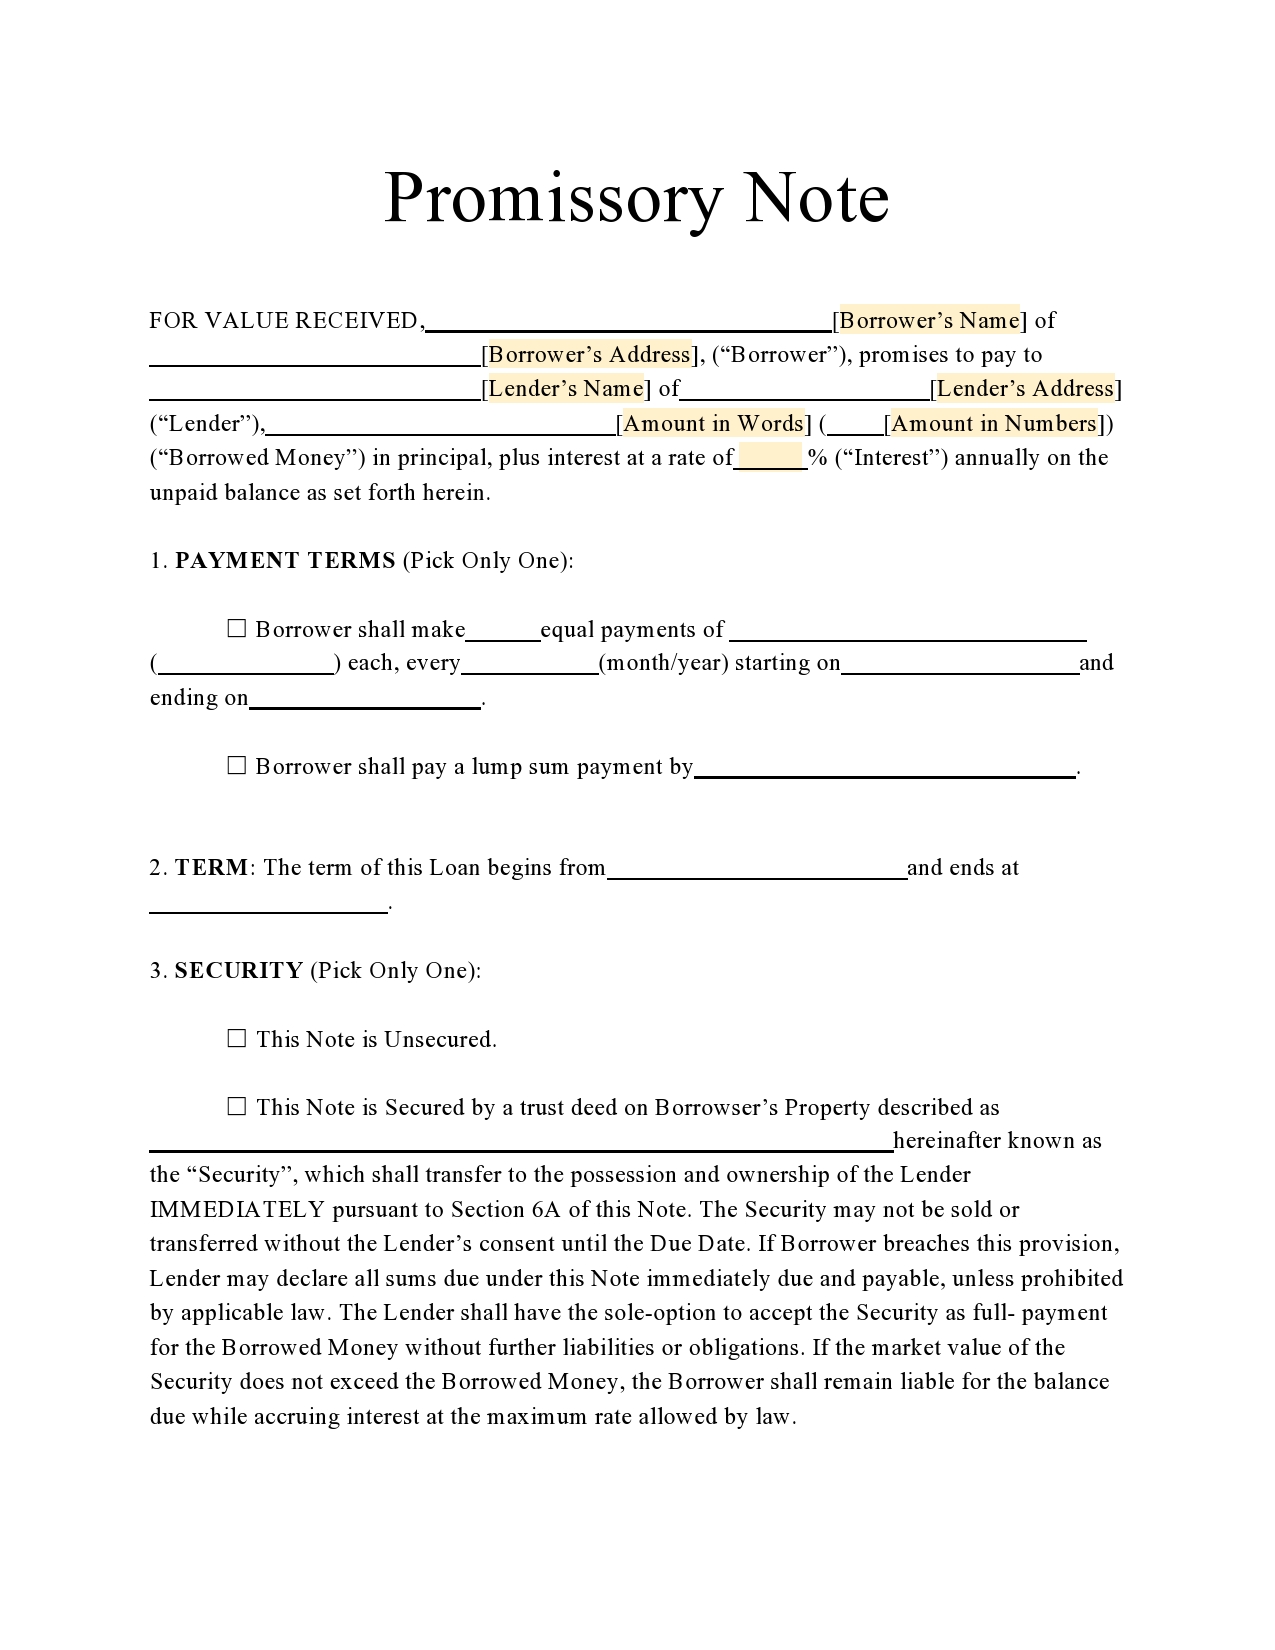 Free promissory note template 10